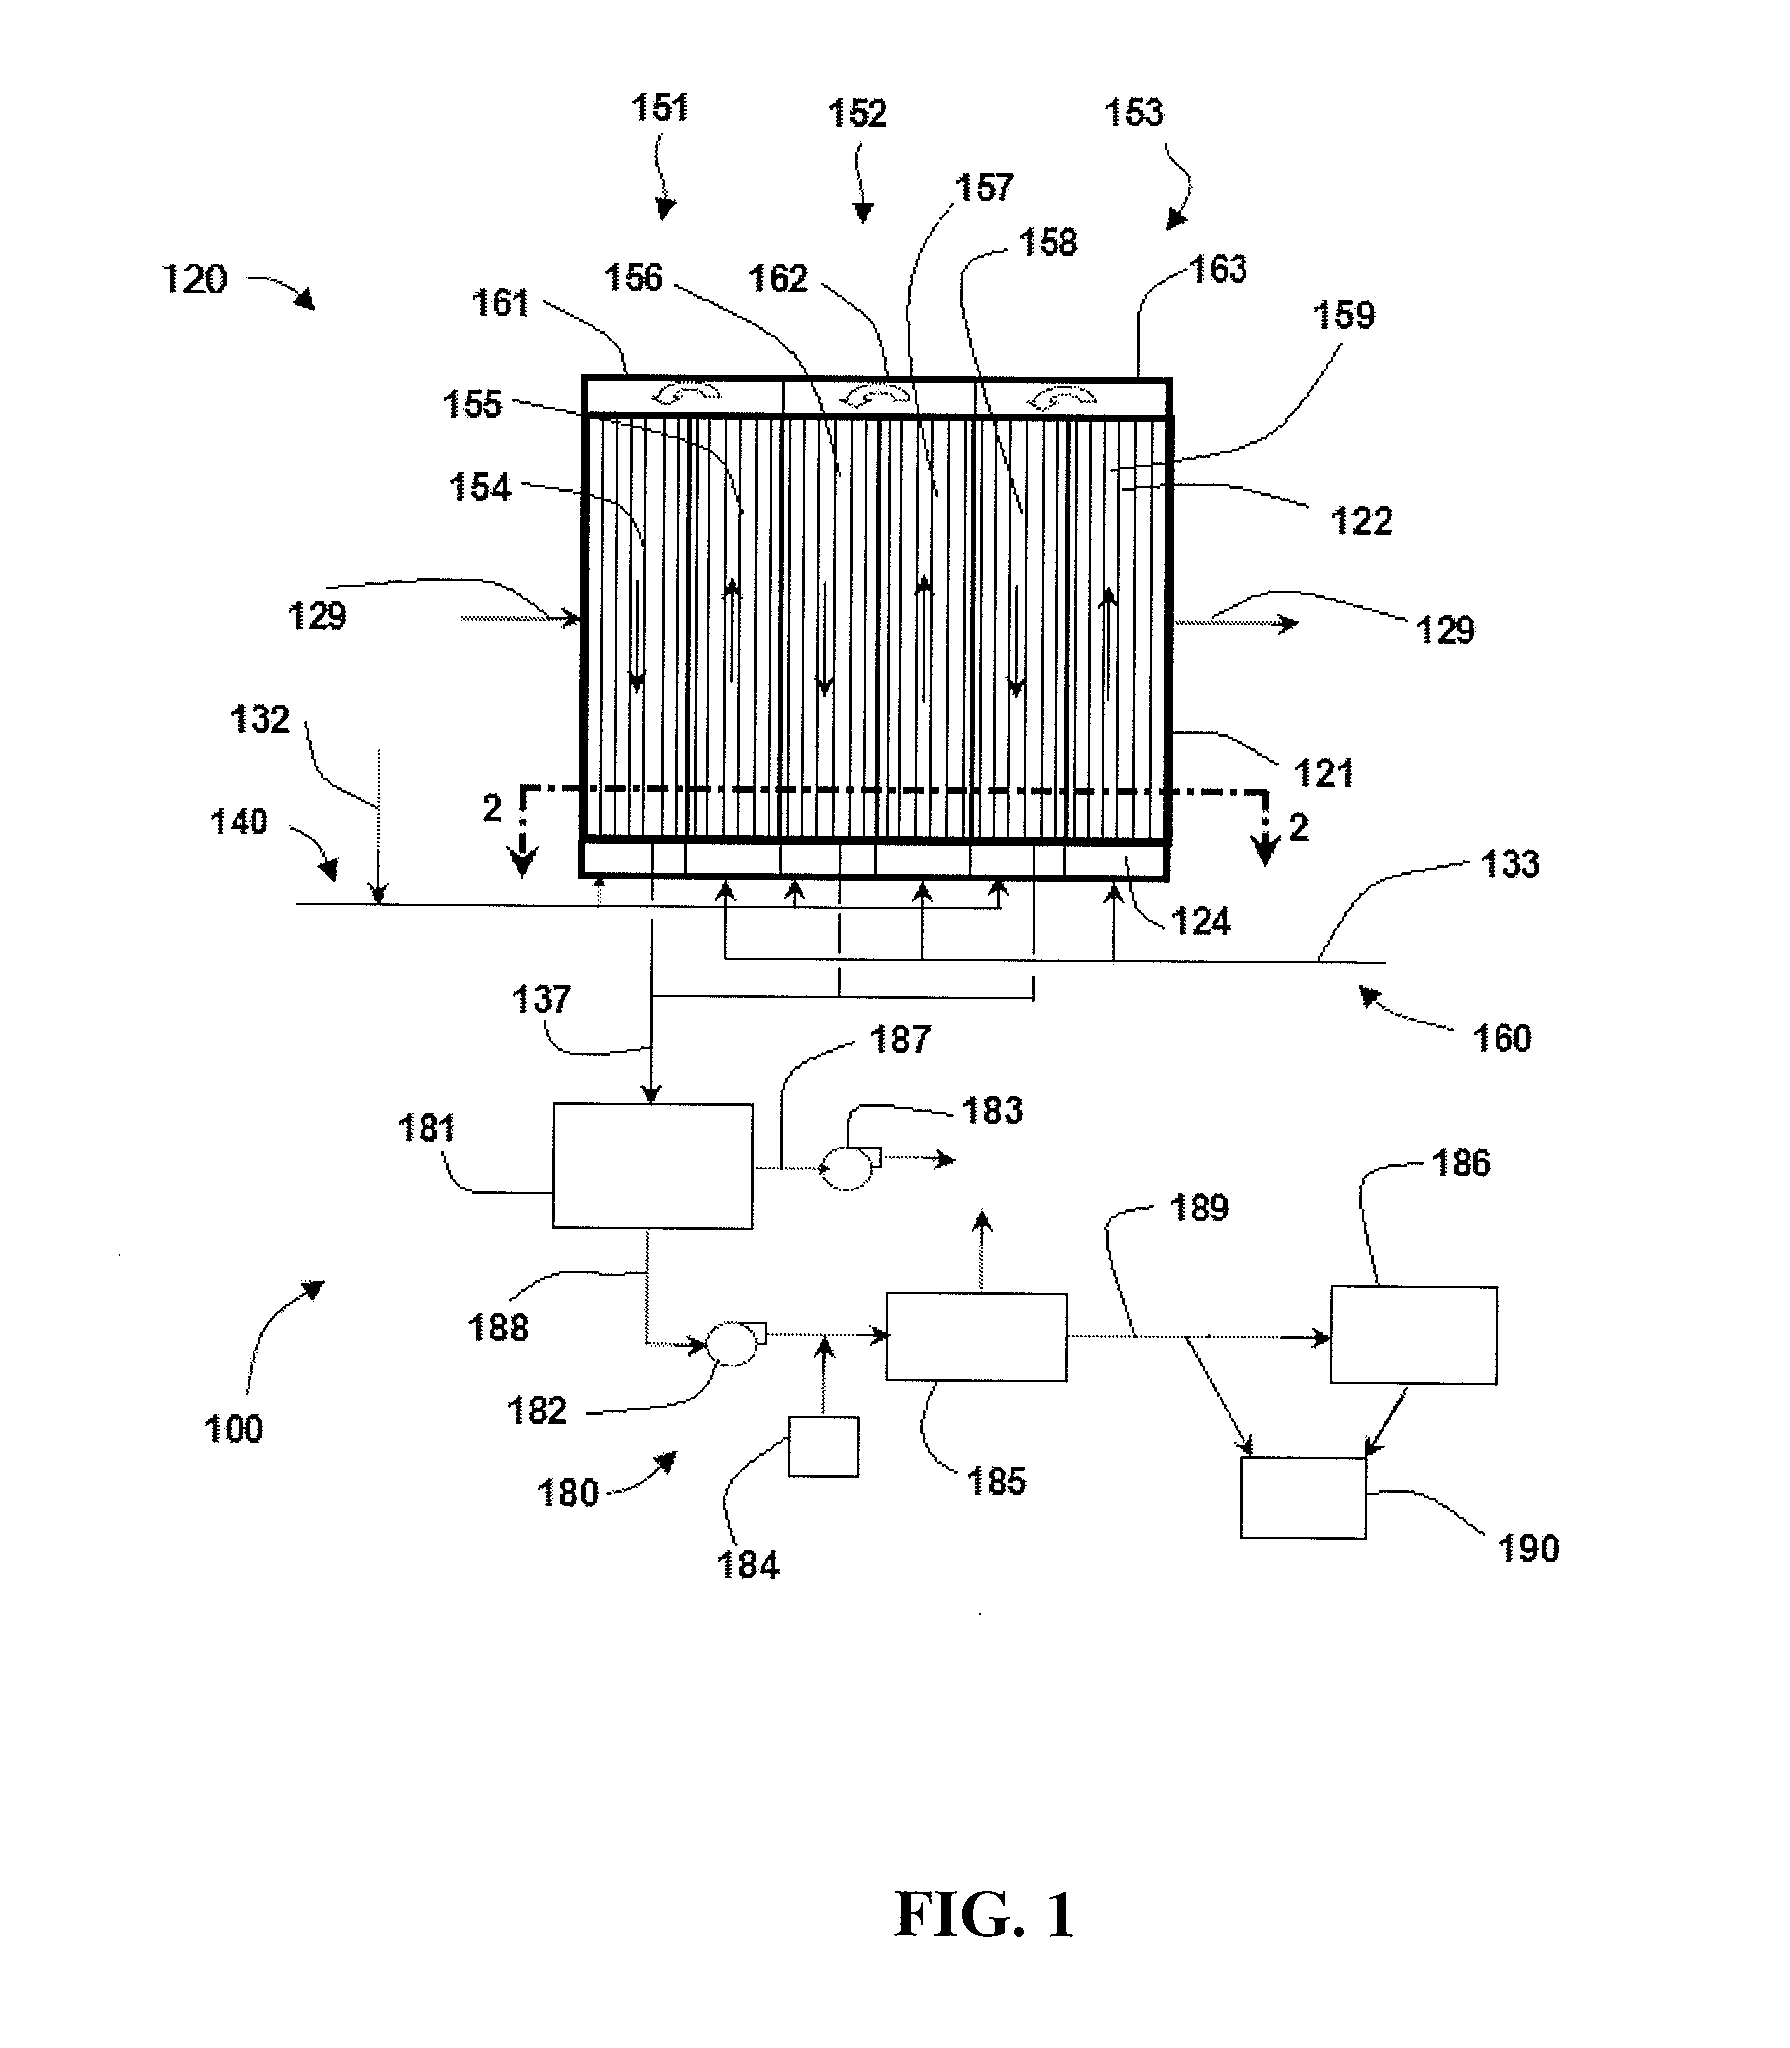 System and Method for Growing Photosynthetic Cells